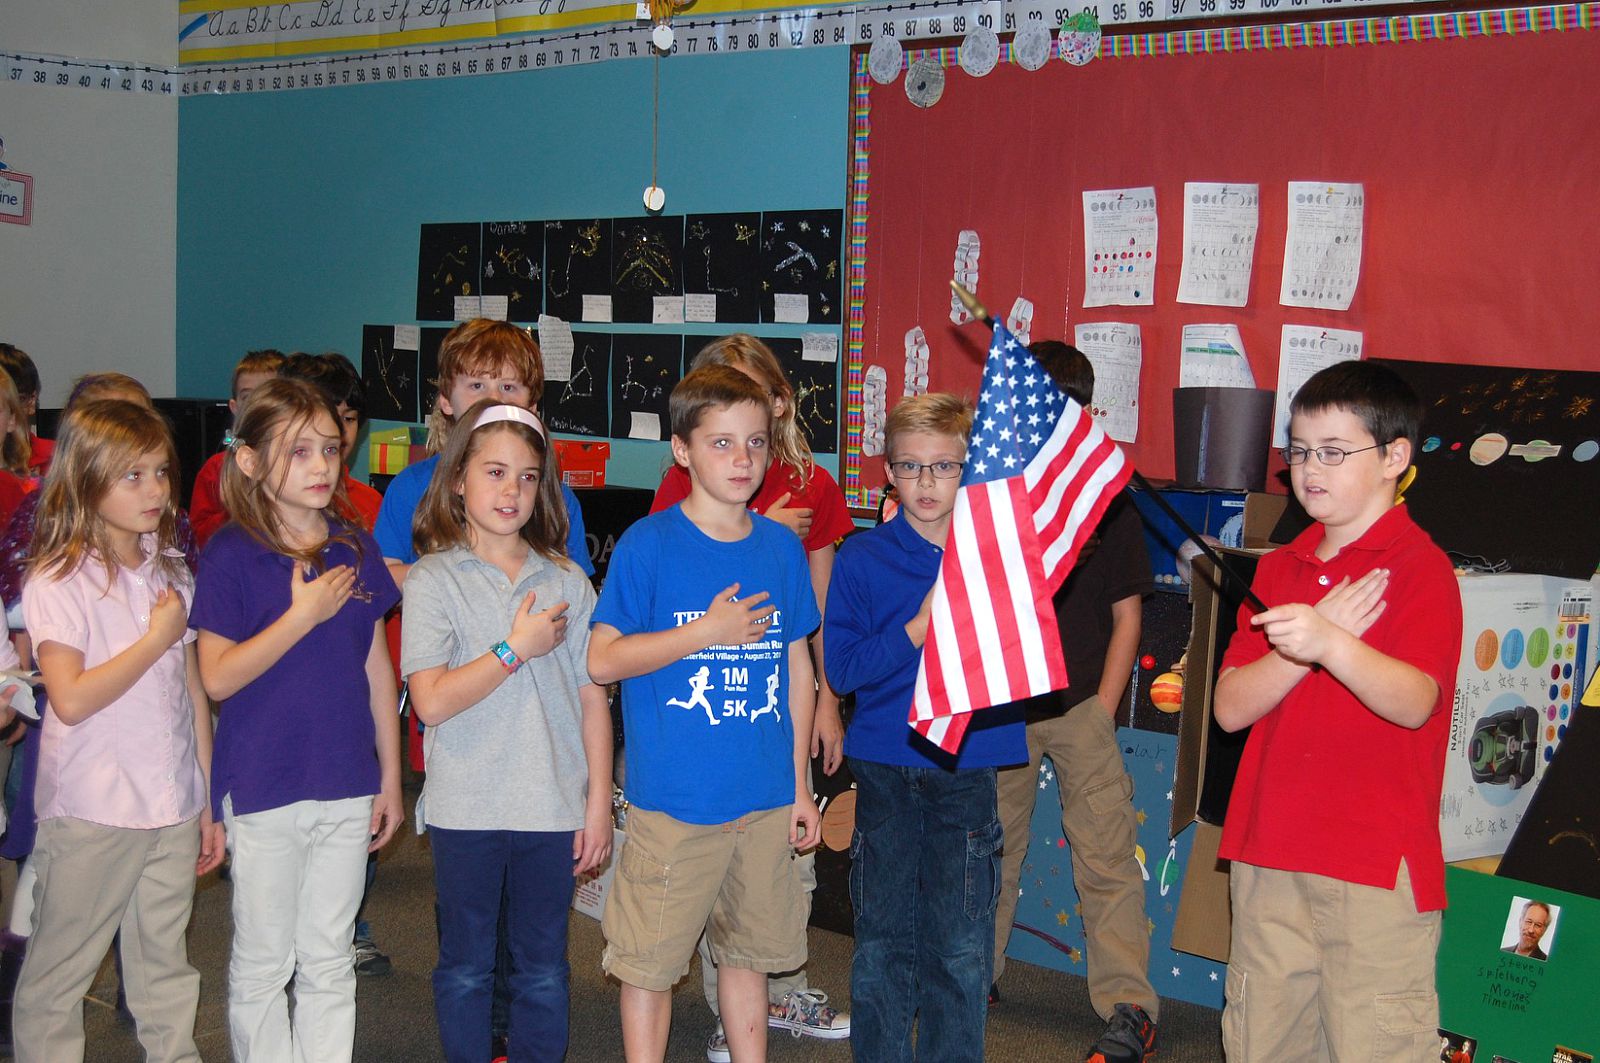 It's creepy that kids recite the Pledge of Allegiance every day in school.